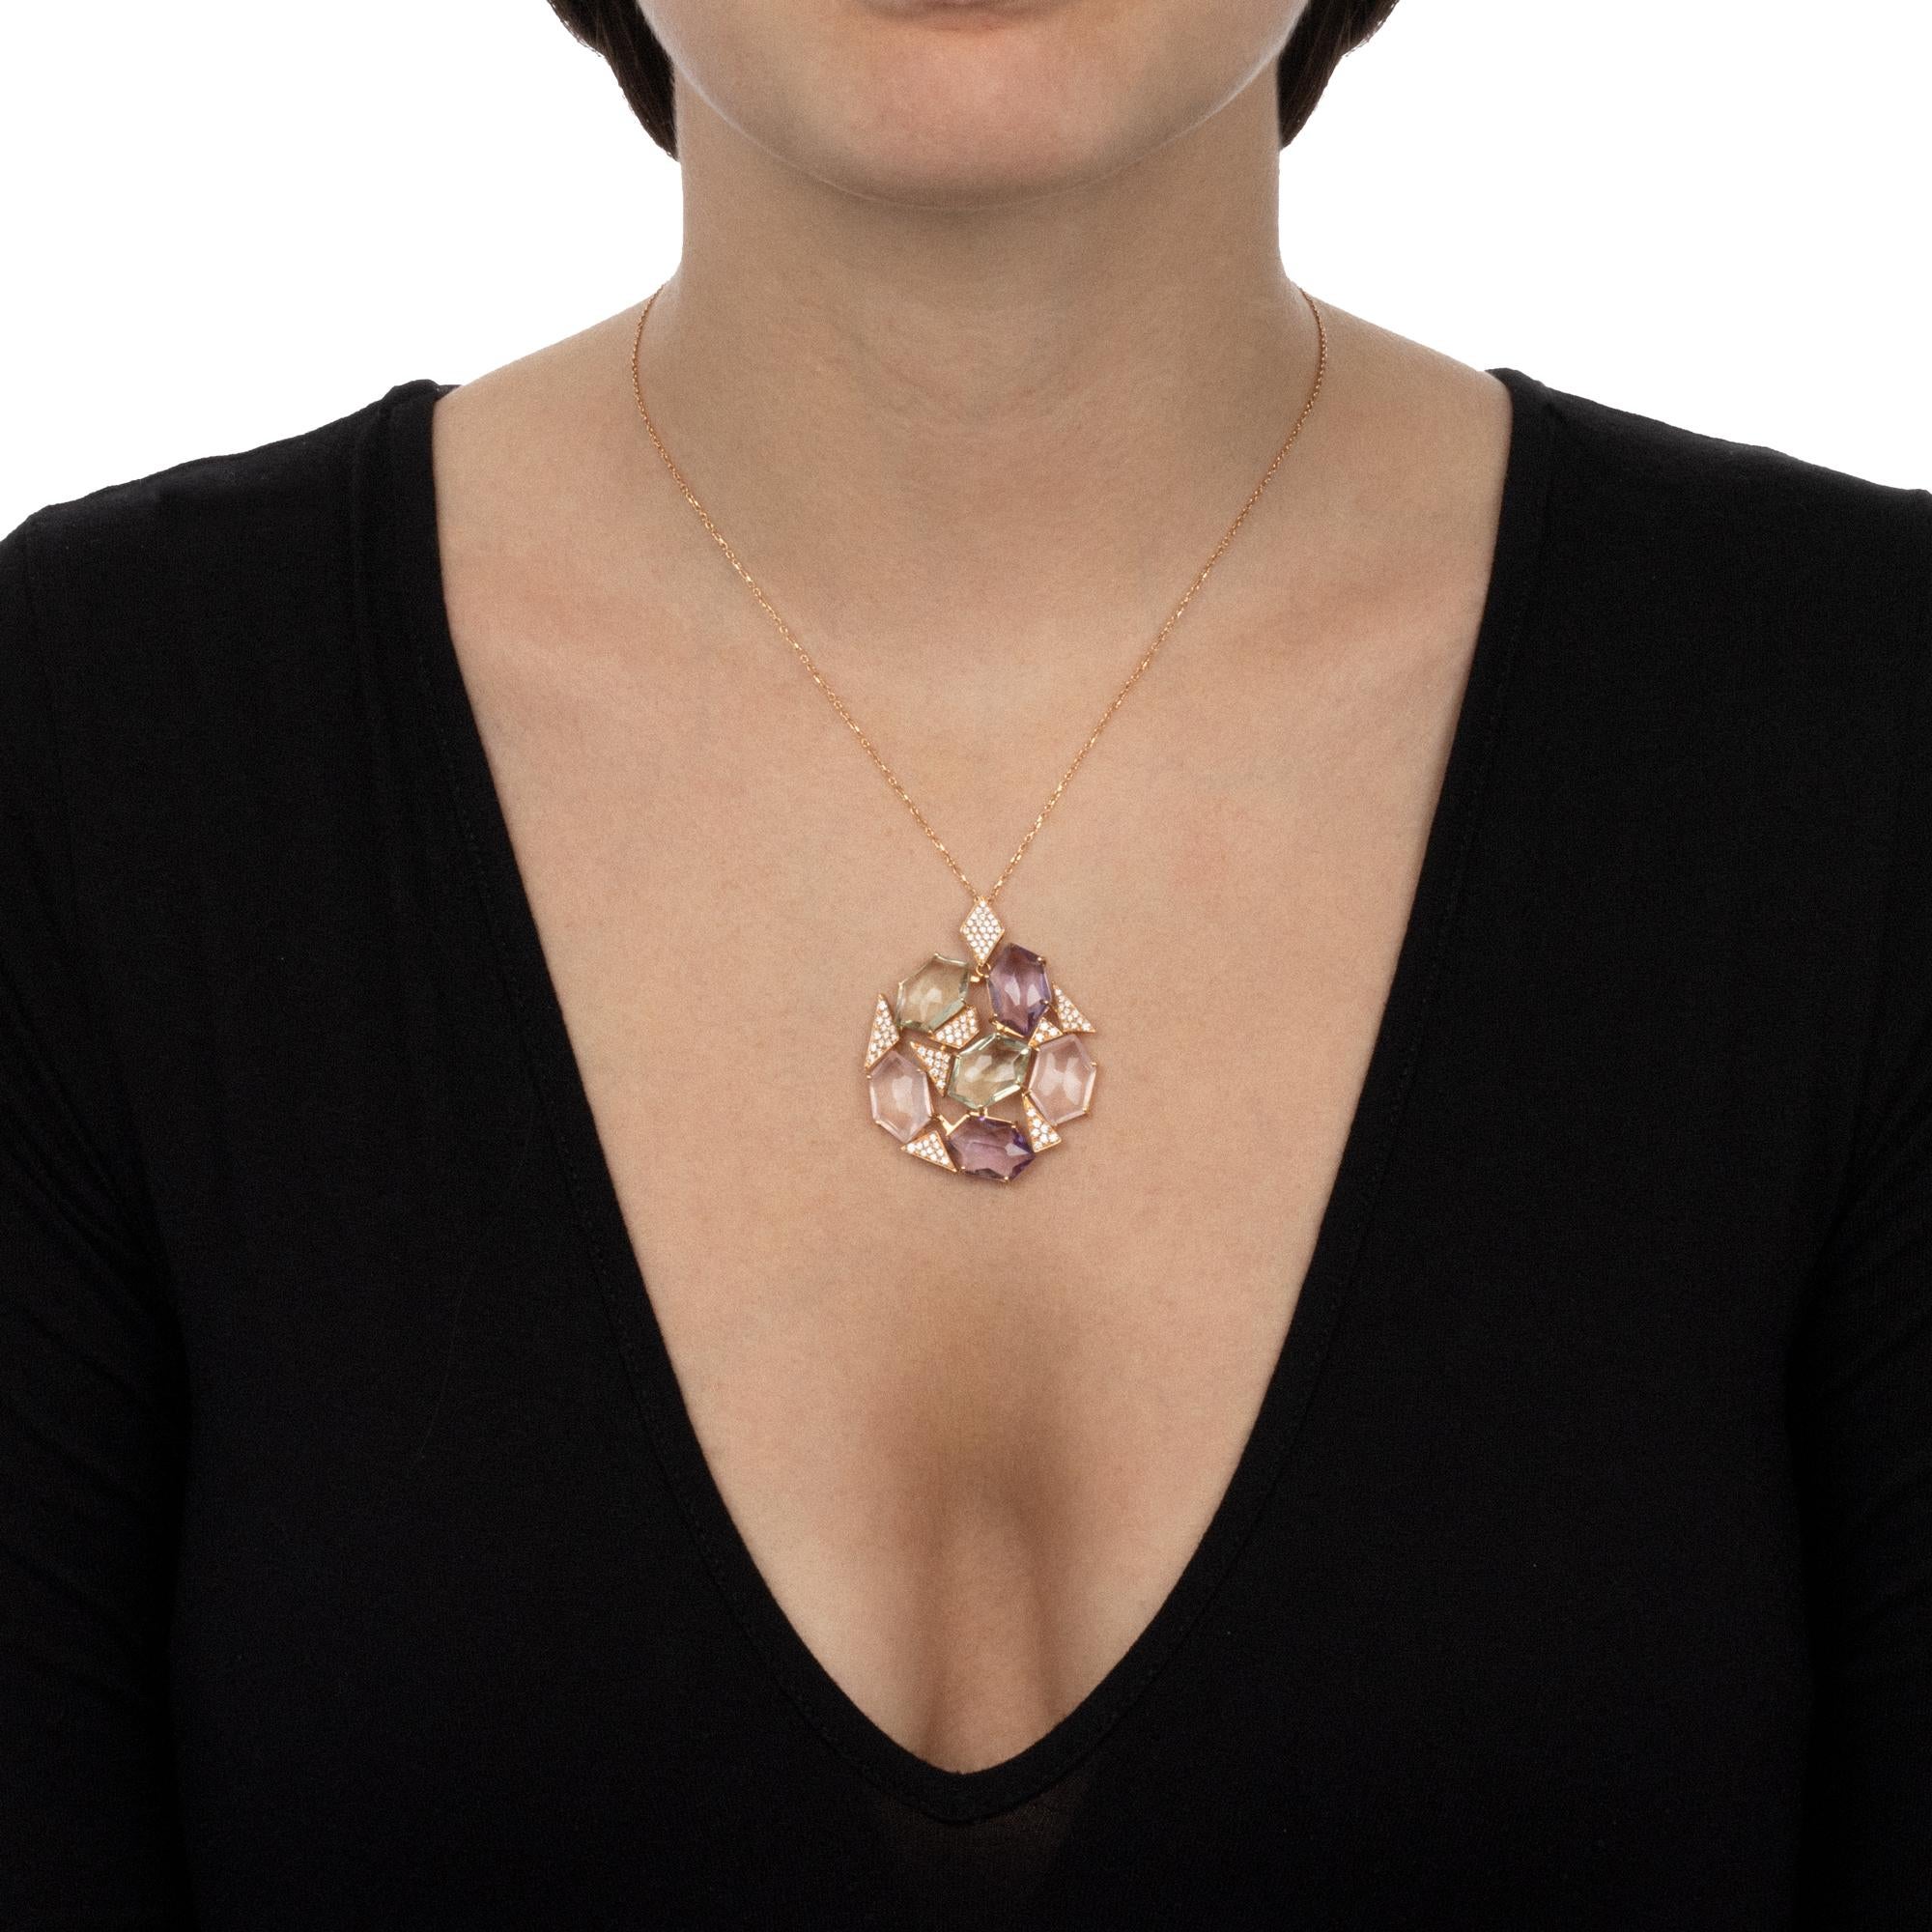 An handmade contemporary jewellery piece with a modern design that is bold and sophisticated at the same time. The distinctive asymmetrical setting of the pendant lets the gemstones sparkle bright, drawing the light around your neckline with the